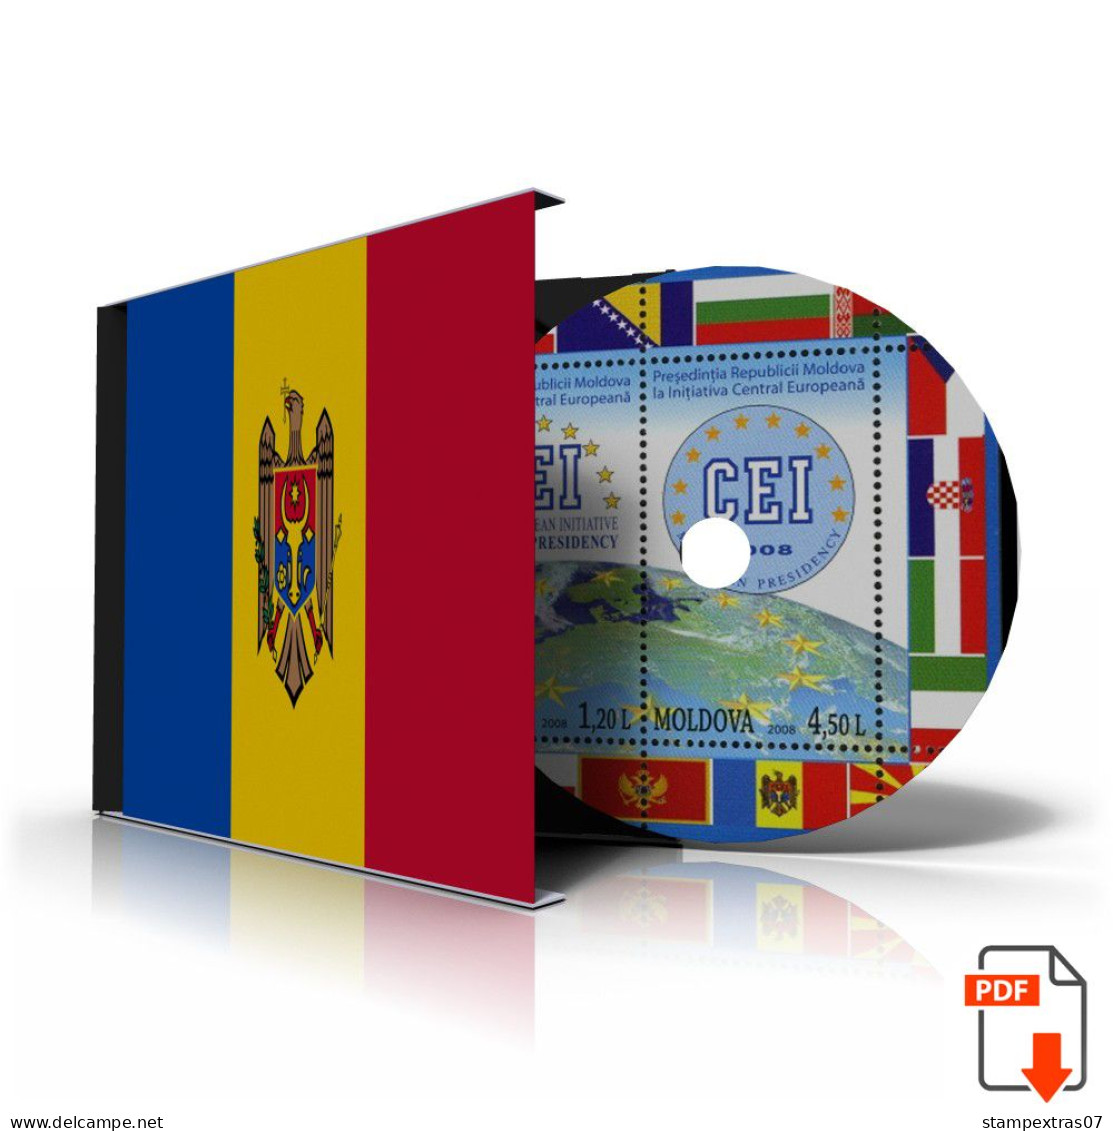 MOLDOVA STAMP ALBUM PAGES 1991-2011 (100 Color Illustrated Pages) - Inglese